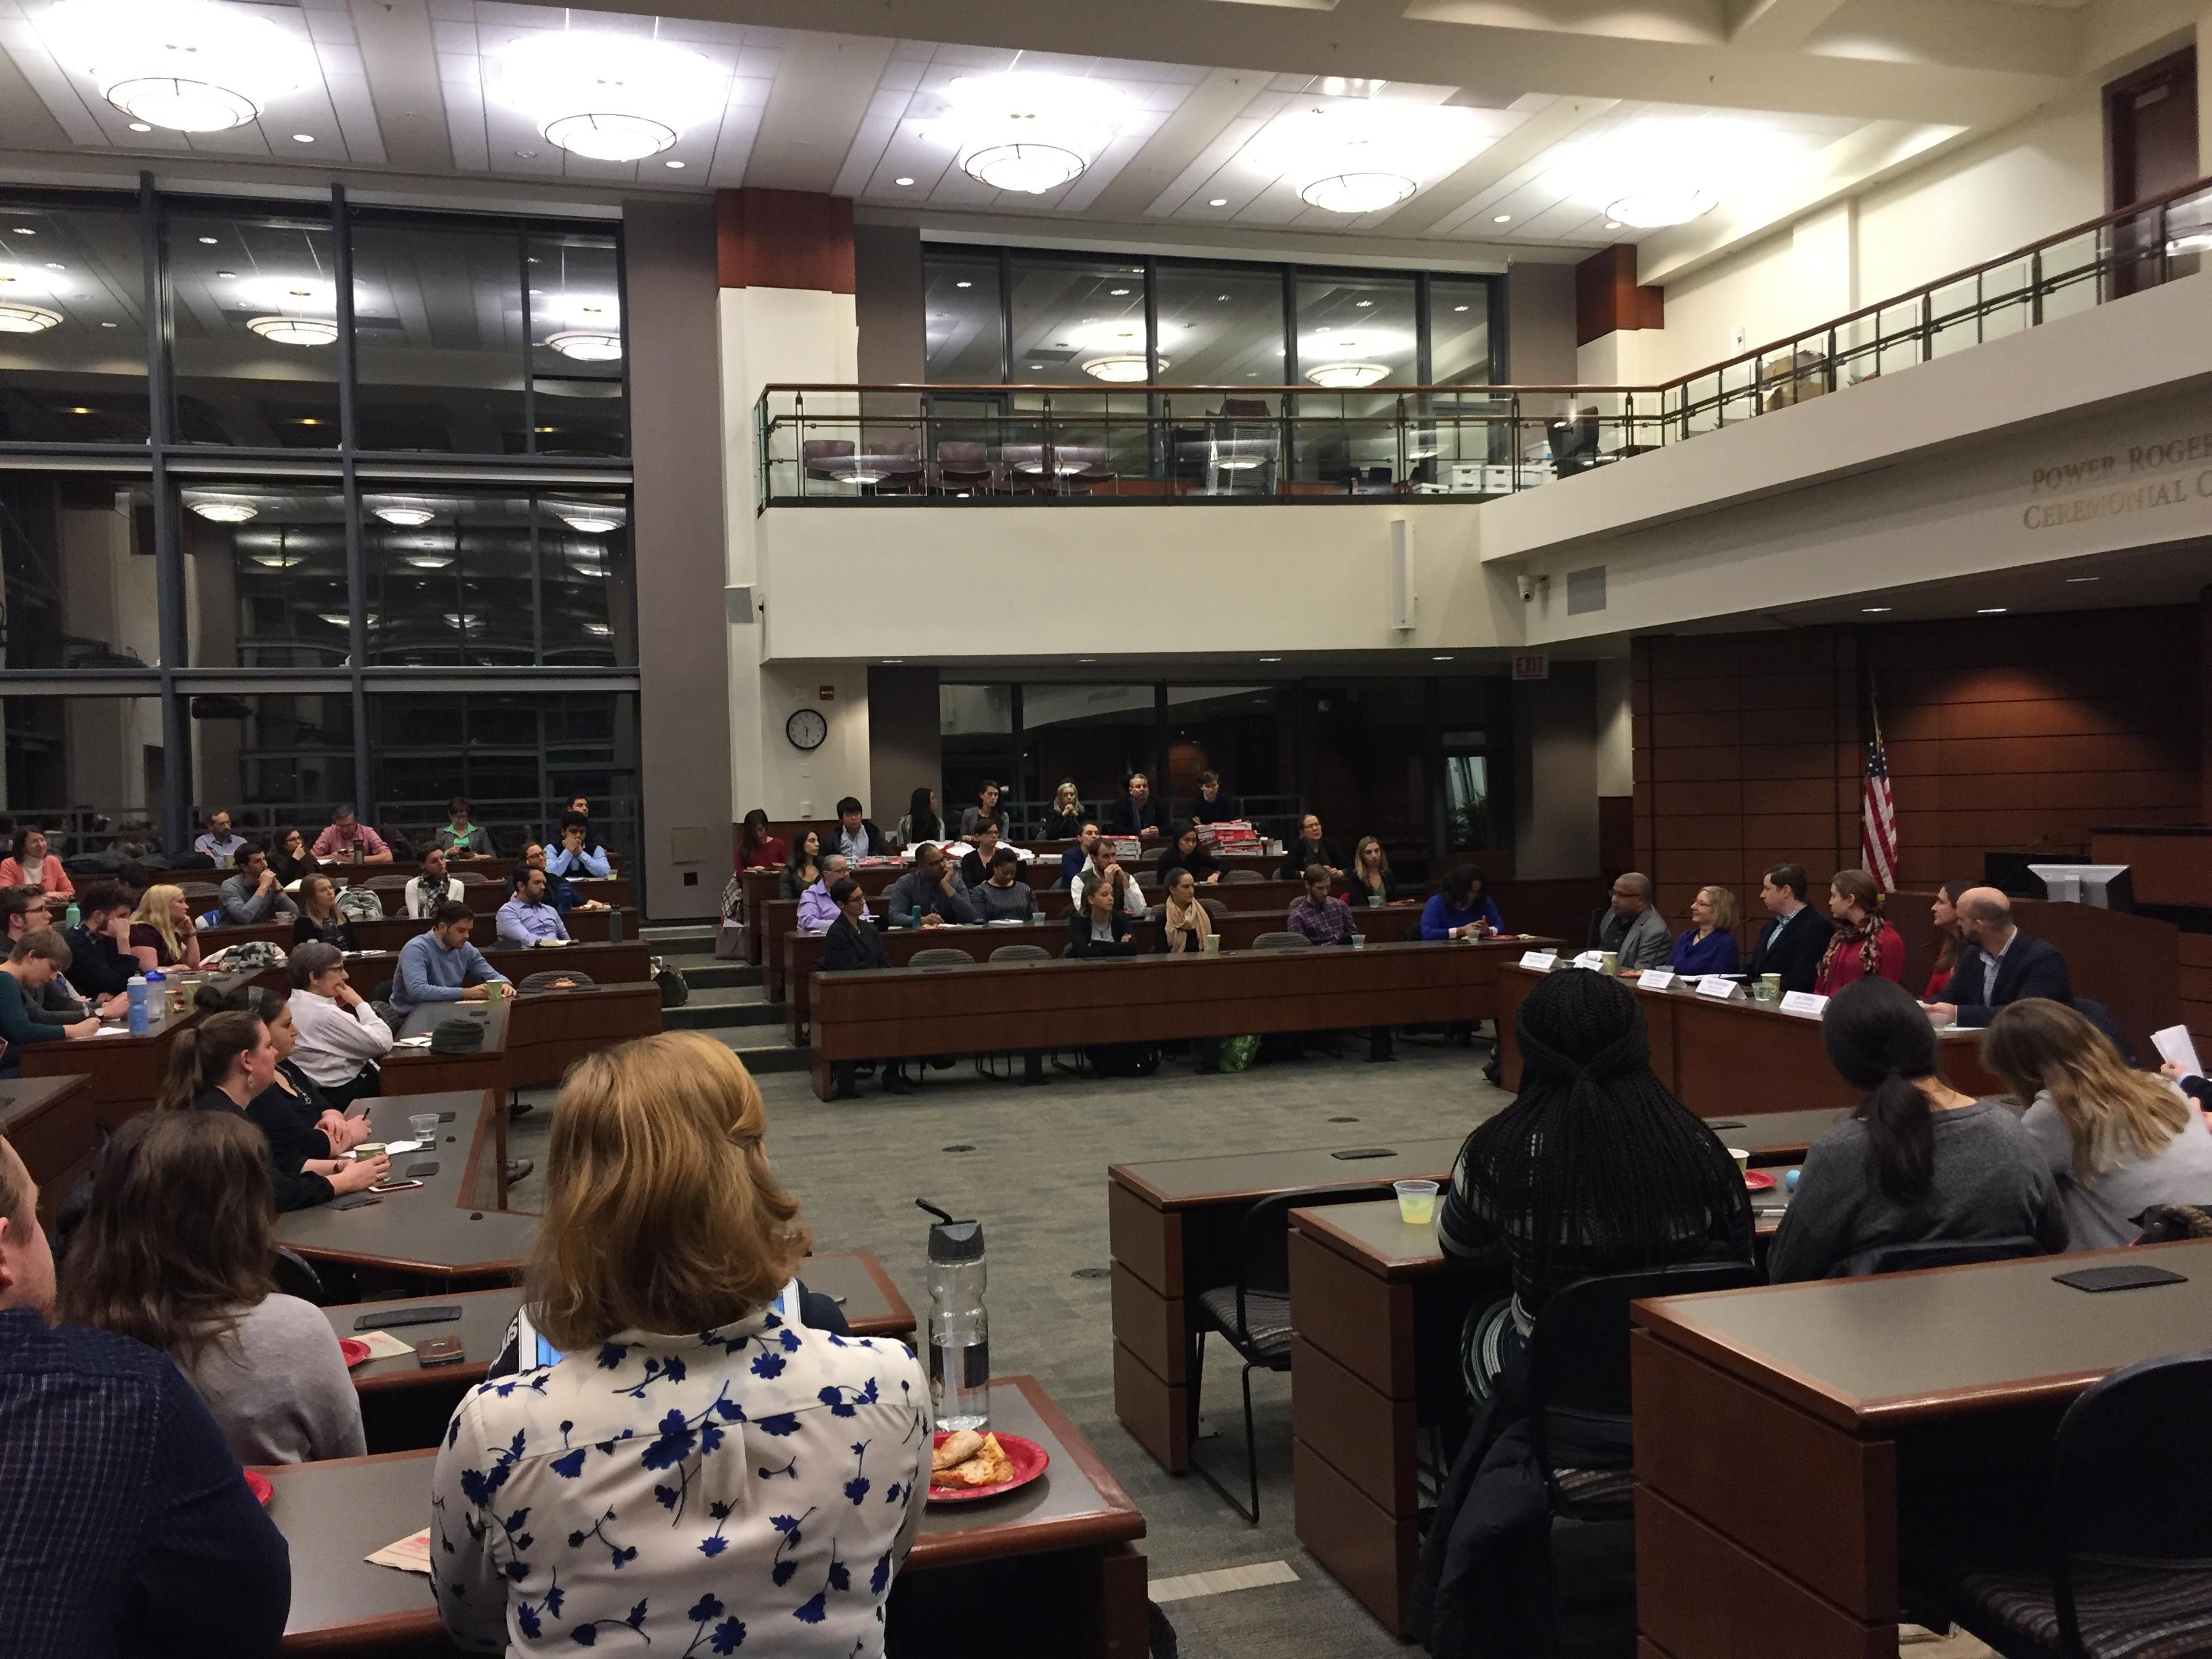 About 100 people gathered Jan. 19 at Loyola University’s School of Law to discuss environmental issues for 2017 and beyond. (Alex Ruppenthal / Chicago Tonight)